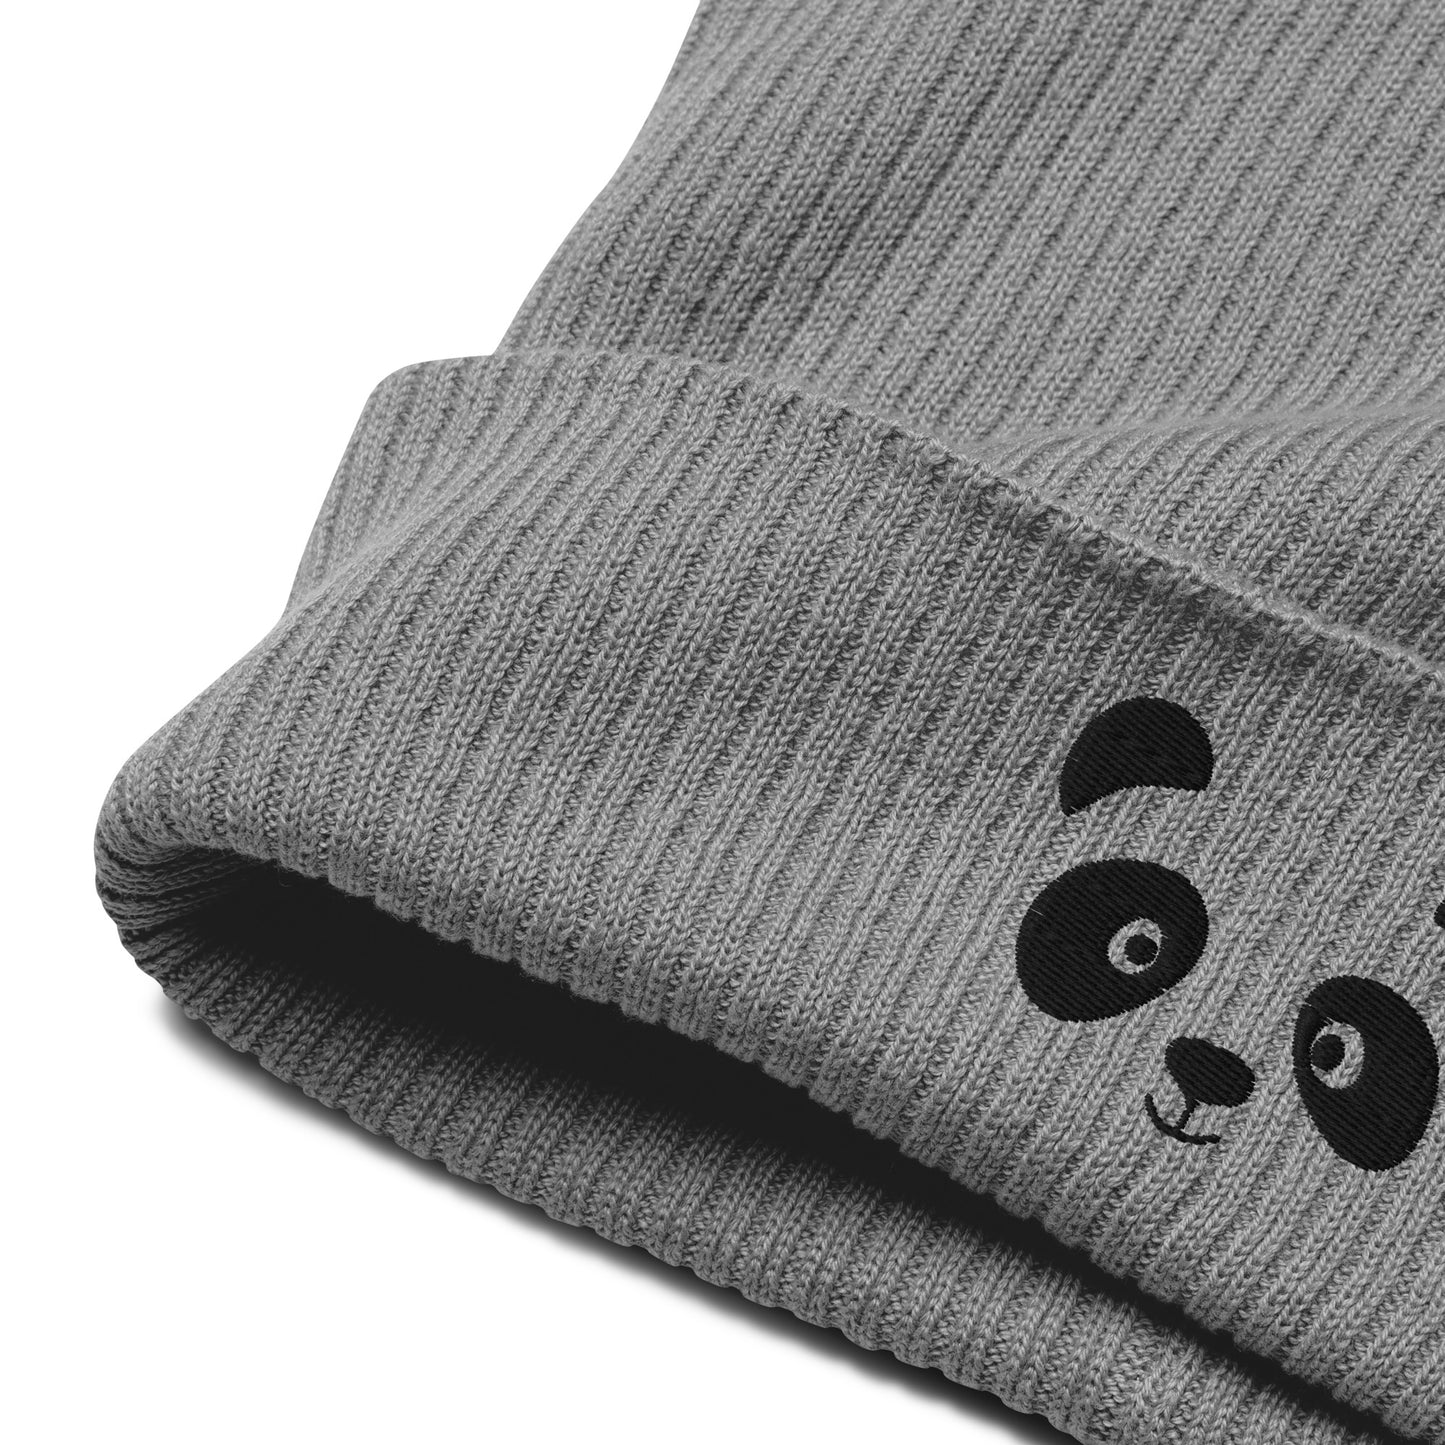 Panda face black embroidered, organic cotton ribbed beanie